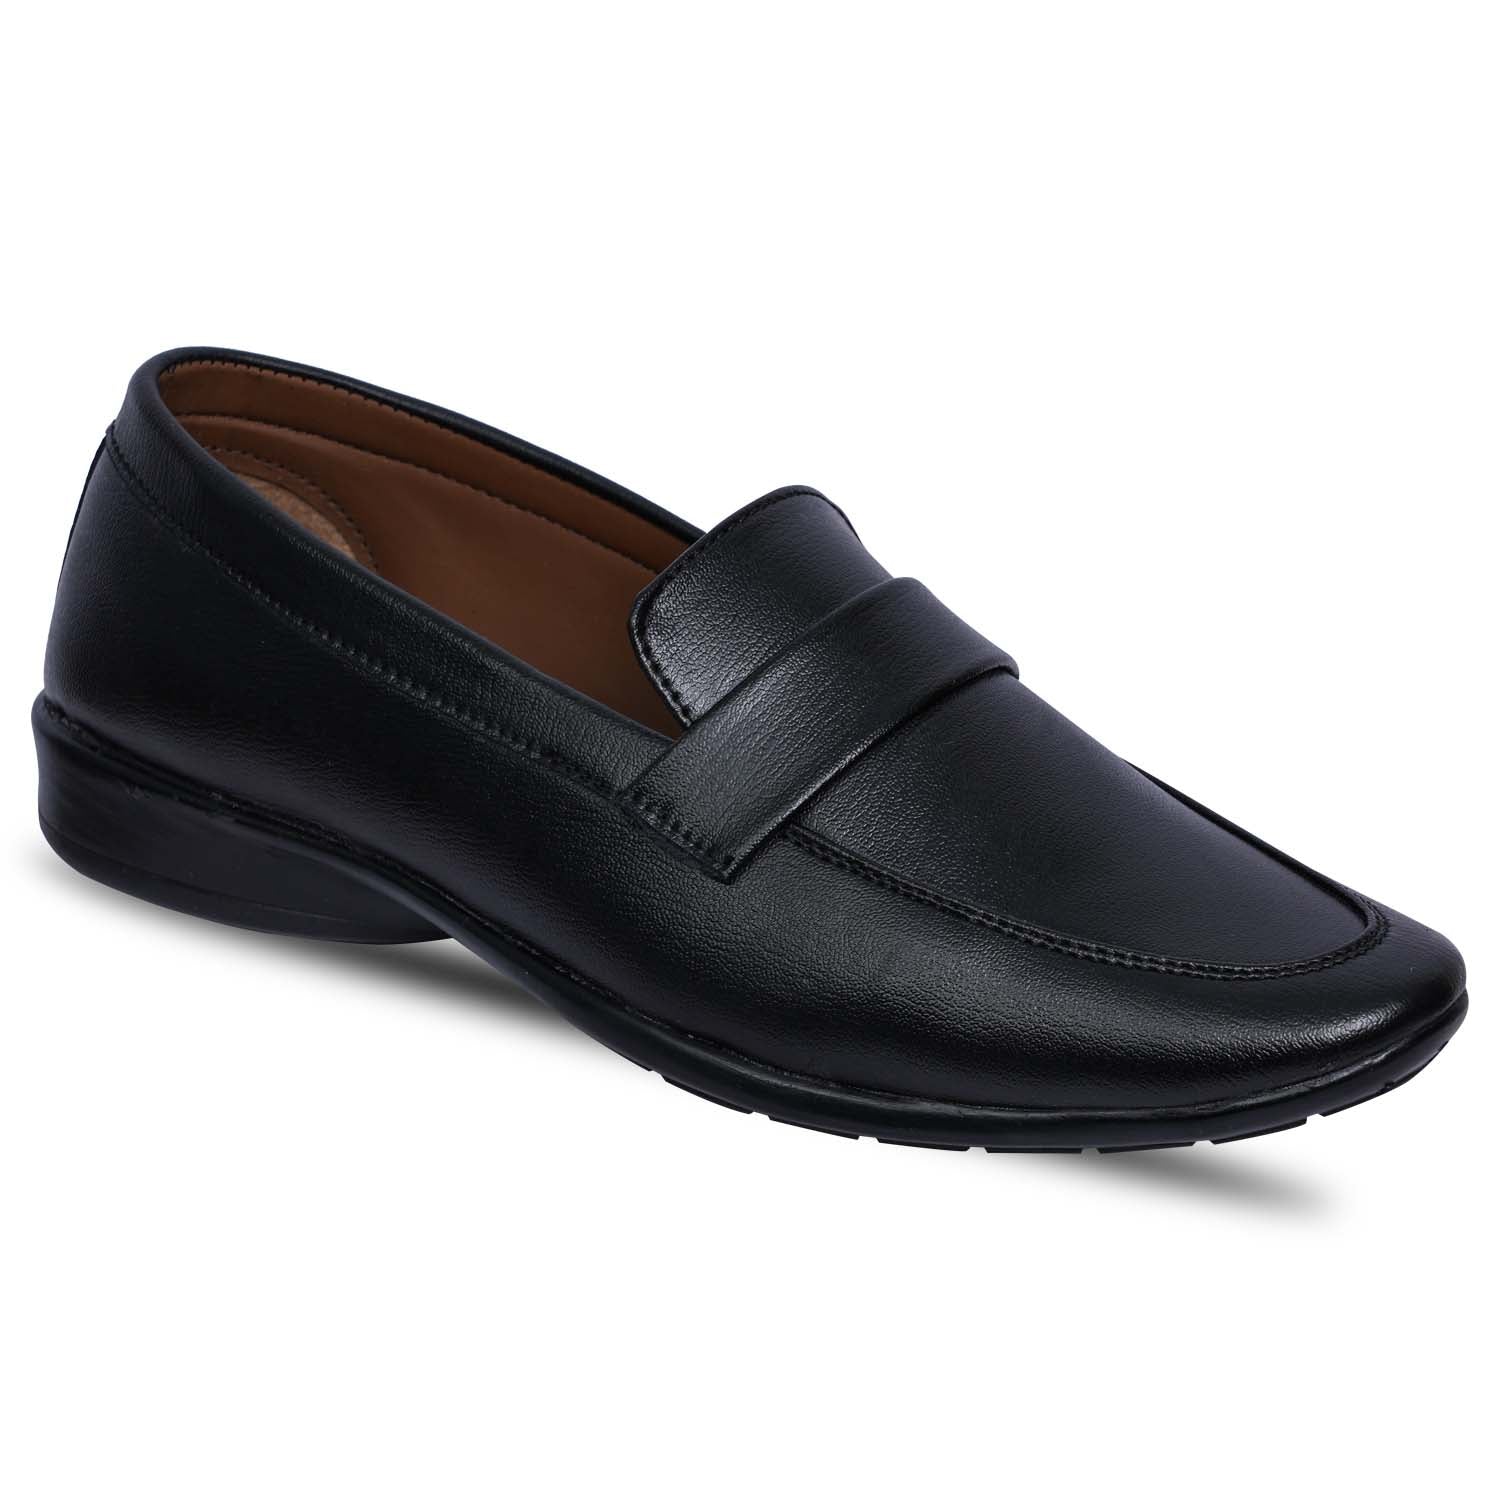 Paragon R2005G Men Formal Shoes | Corporate Office Shoes | Smart &amp; Sleek Design | Comfortable Sole with Cushioning | Daily &amp; Occasion Wear